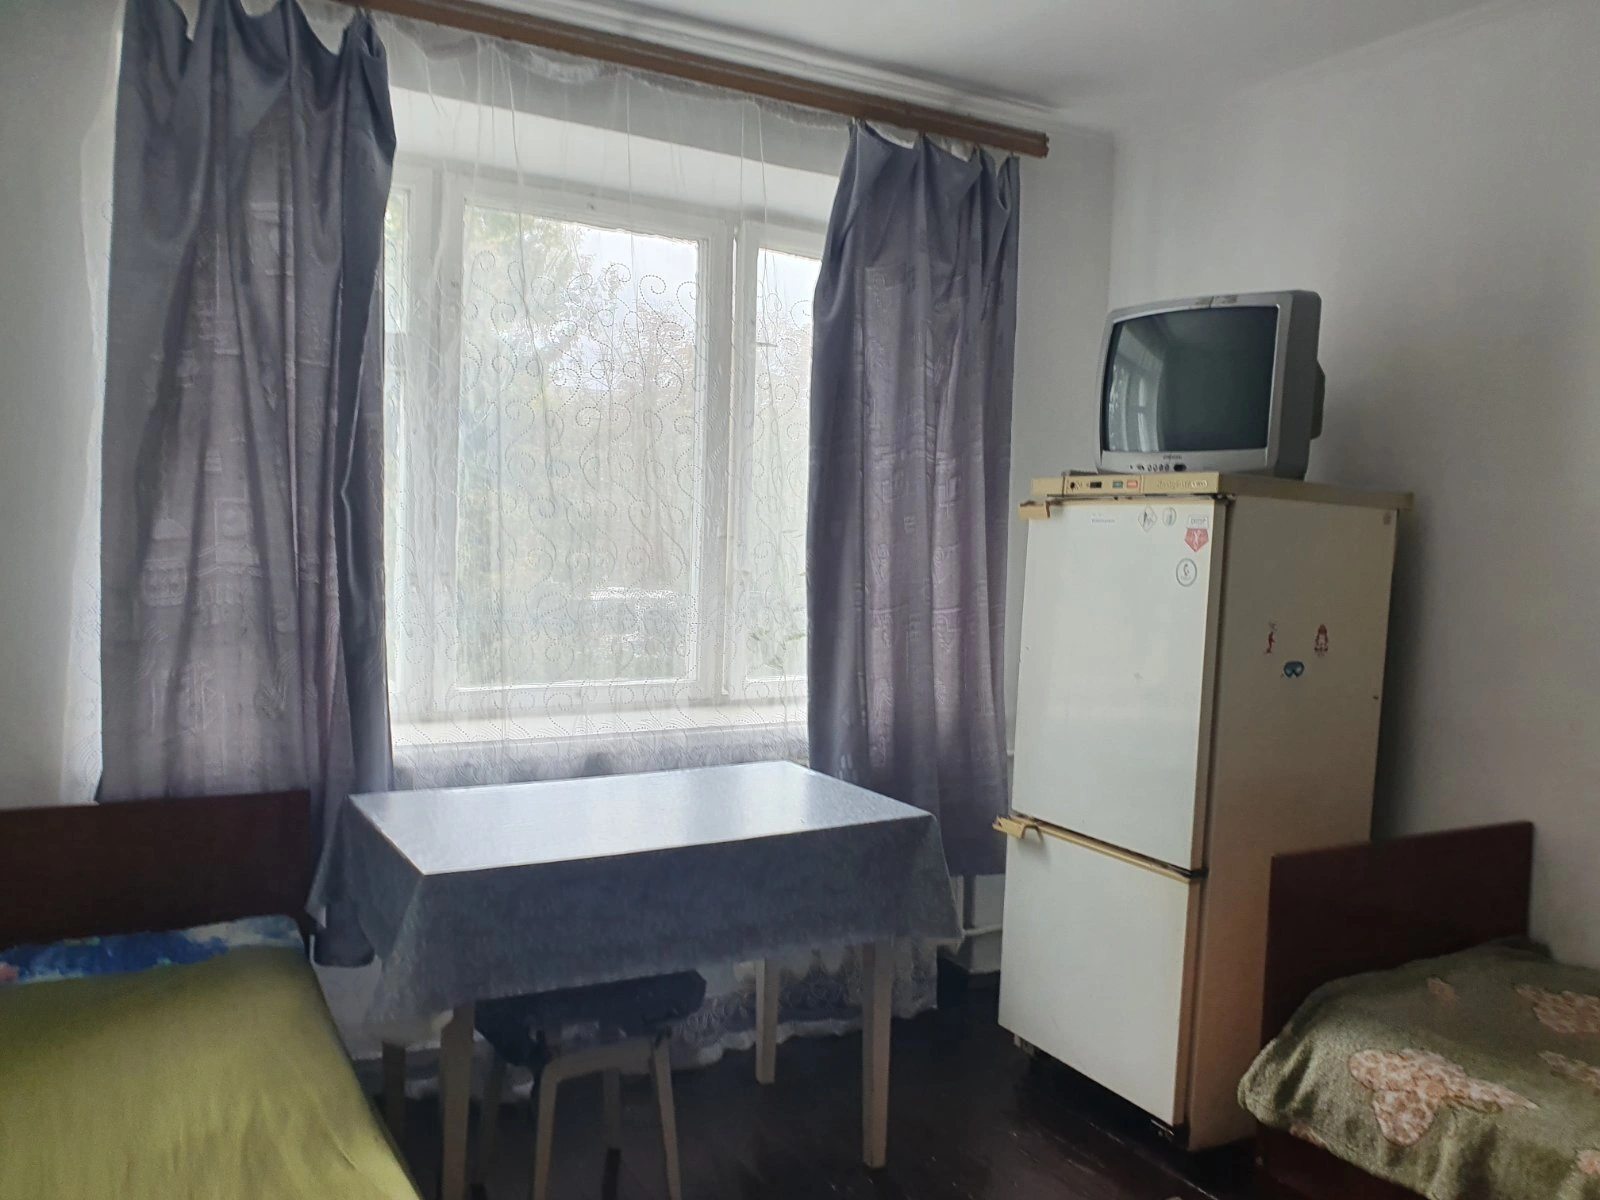 Room for rent for a long time. 1 room, 13 m², 3rd floor/4 floors. Bandery S. vul., Ternopil. 